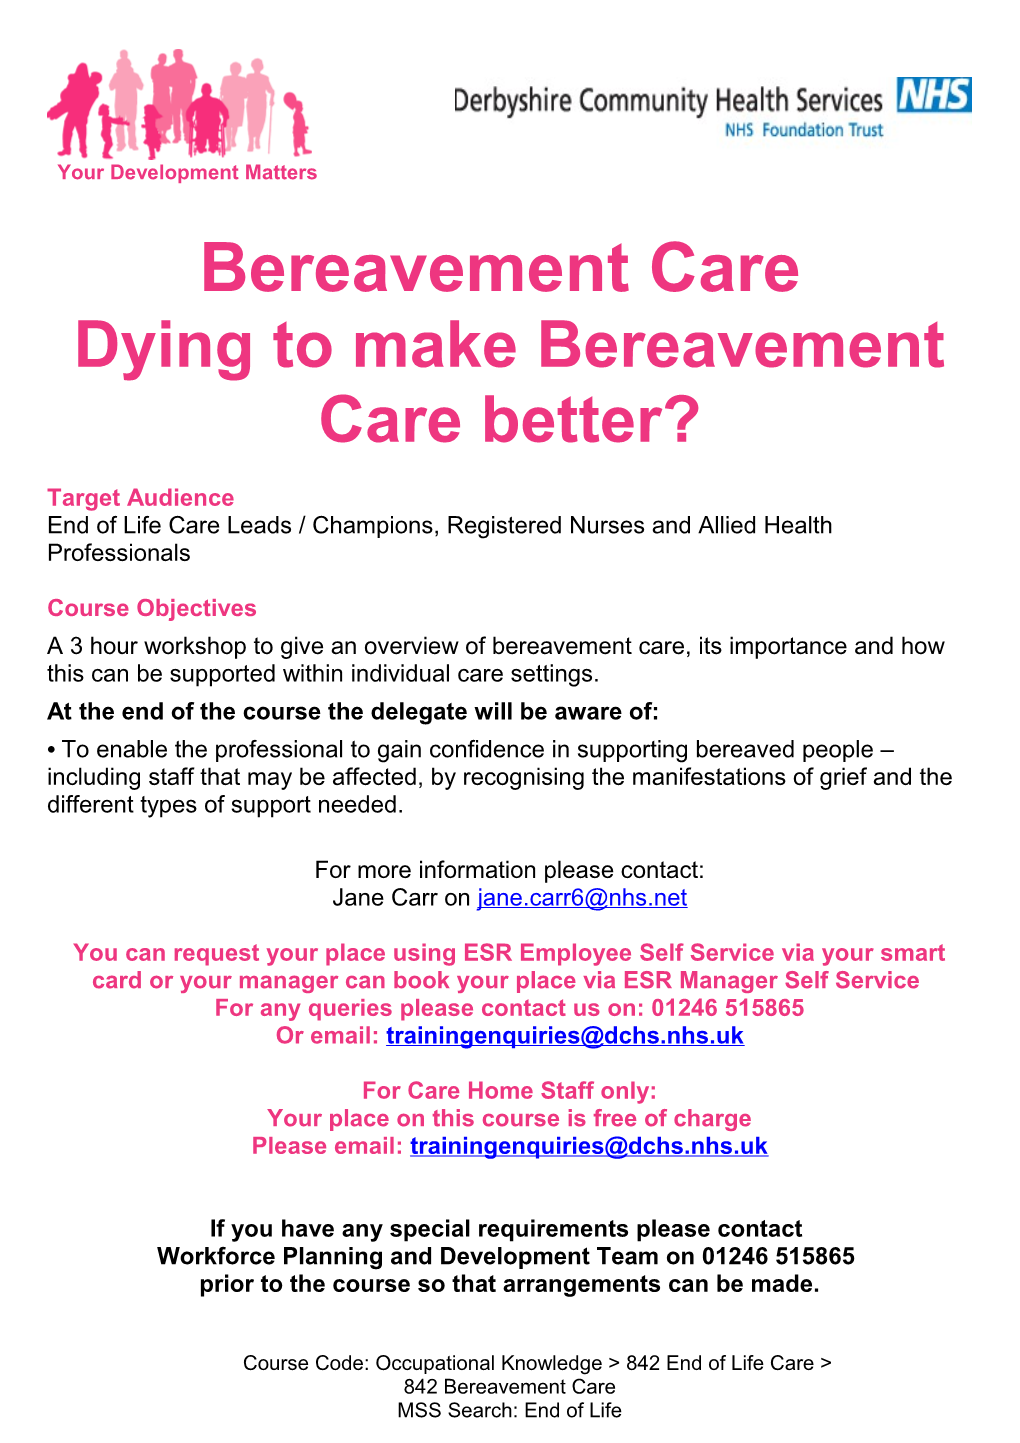 Dying to Make Bereavement Care Better?